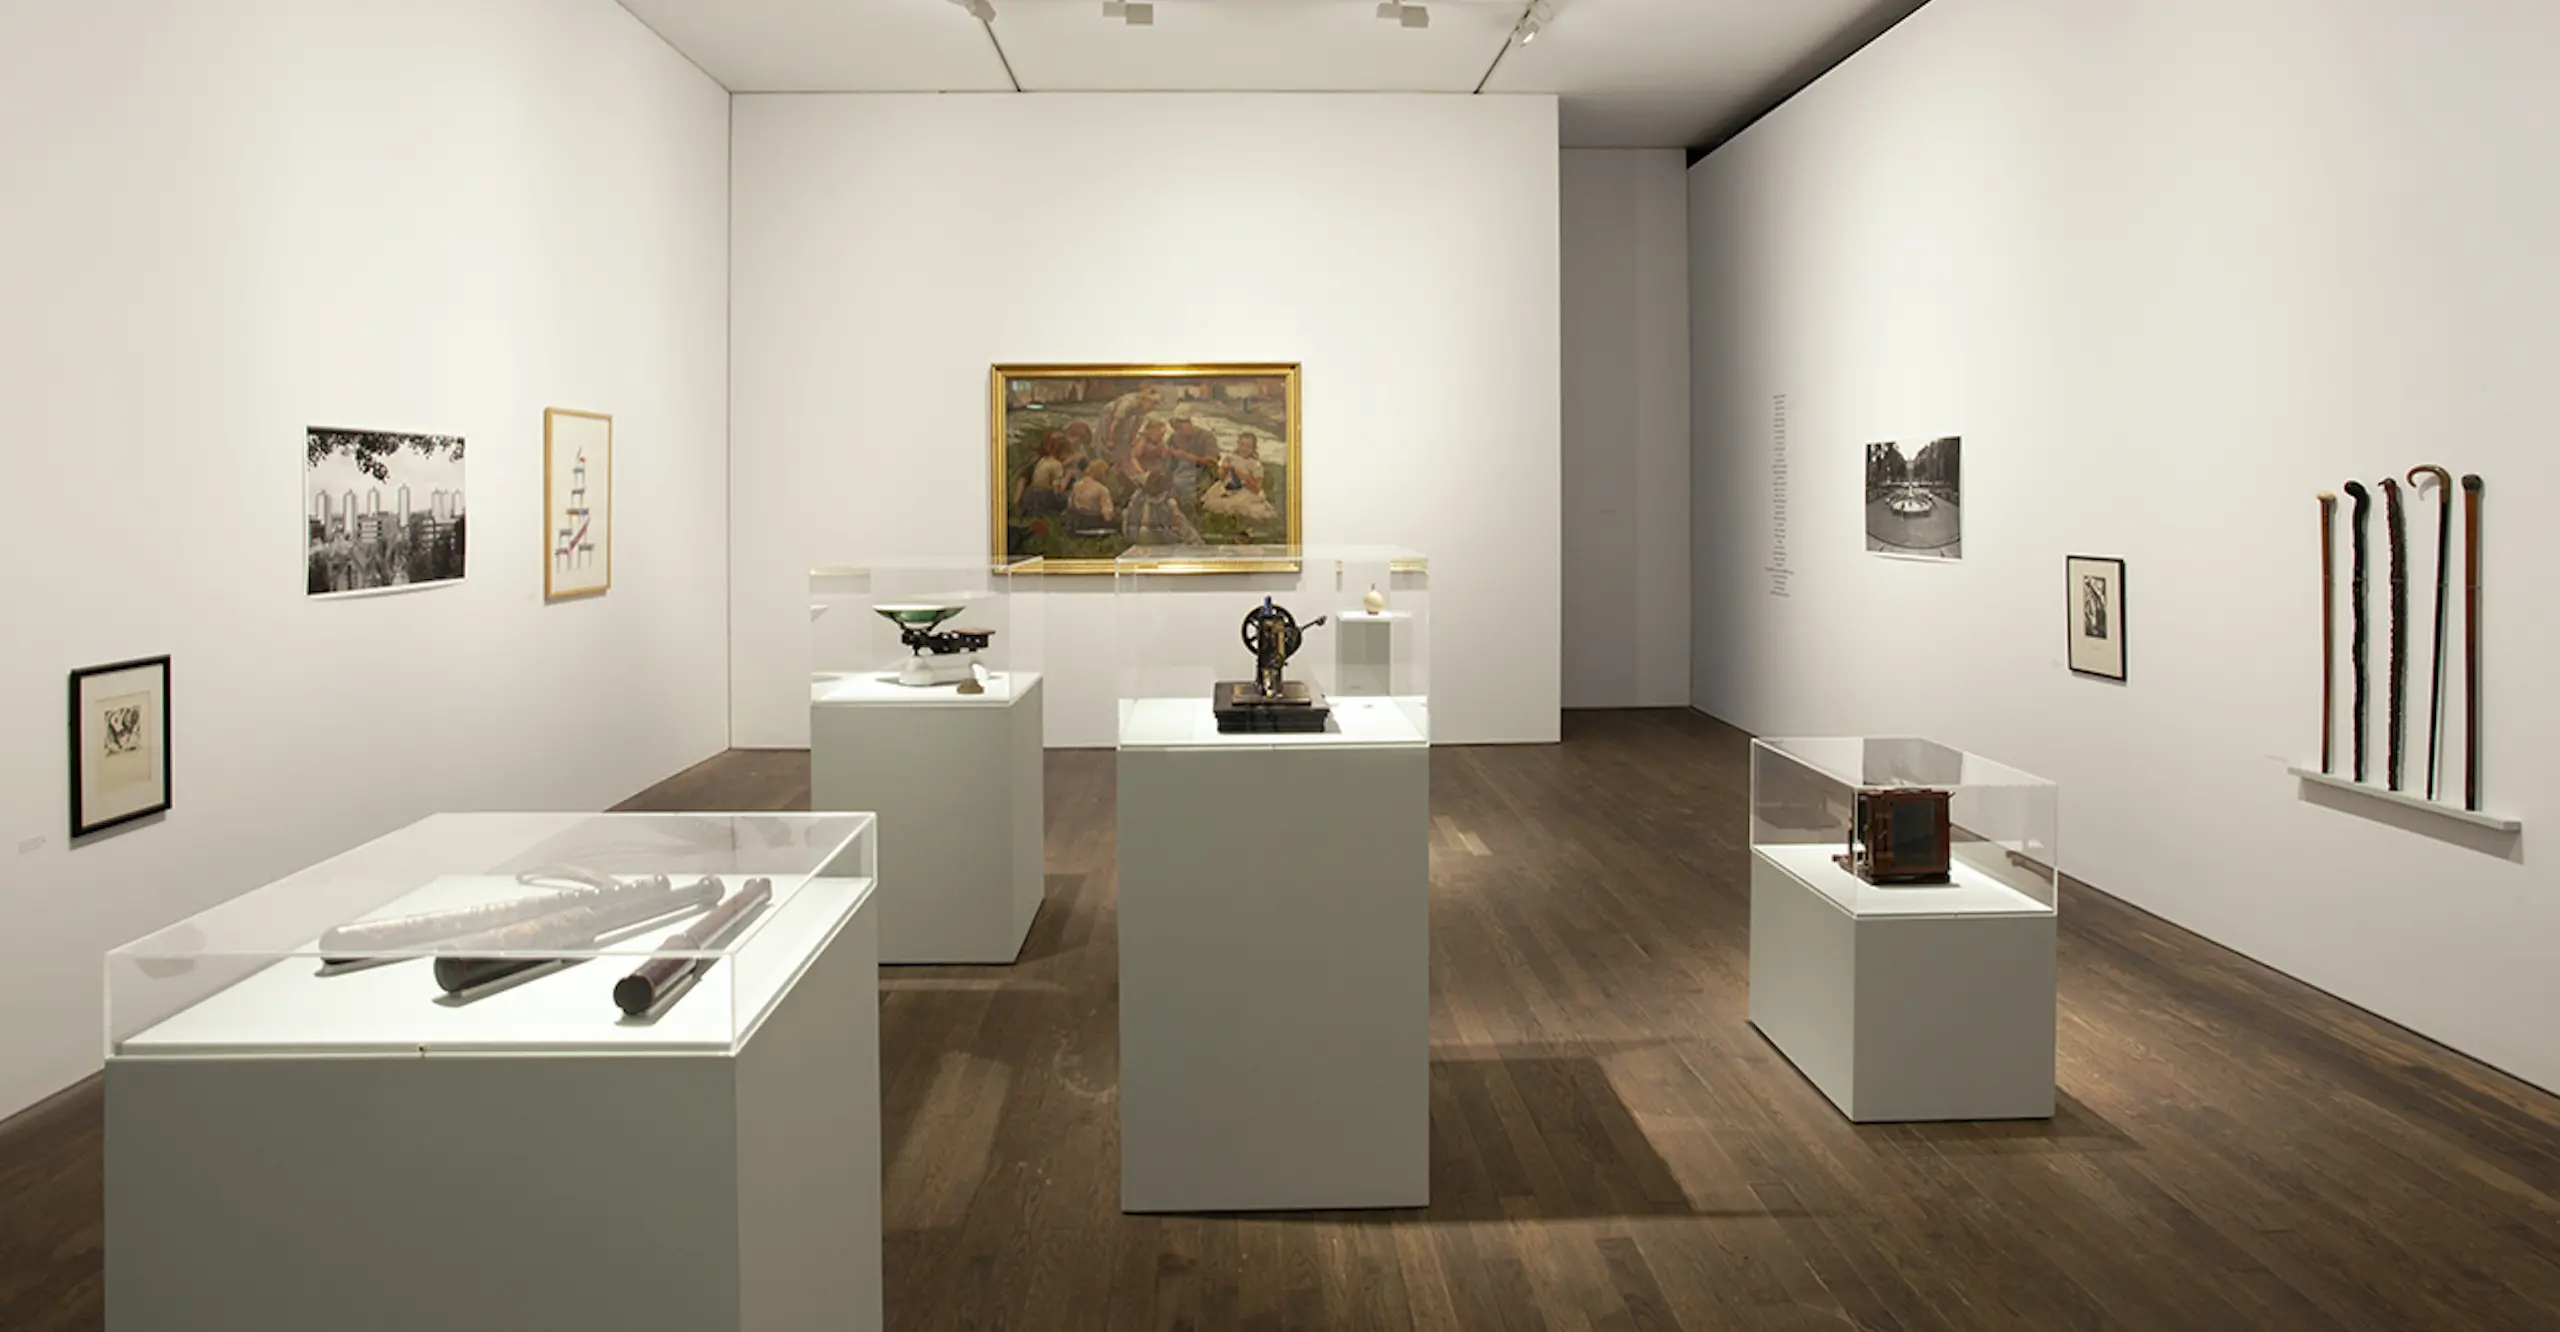 A white gallery room with objects on plinths and pictures on the walls.